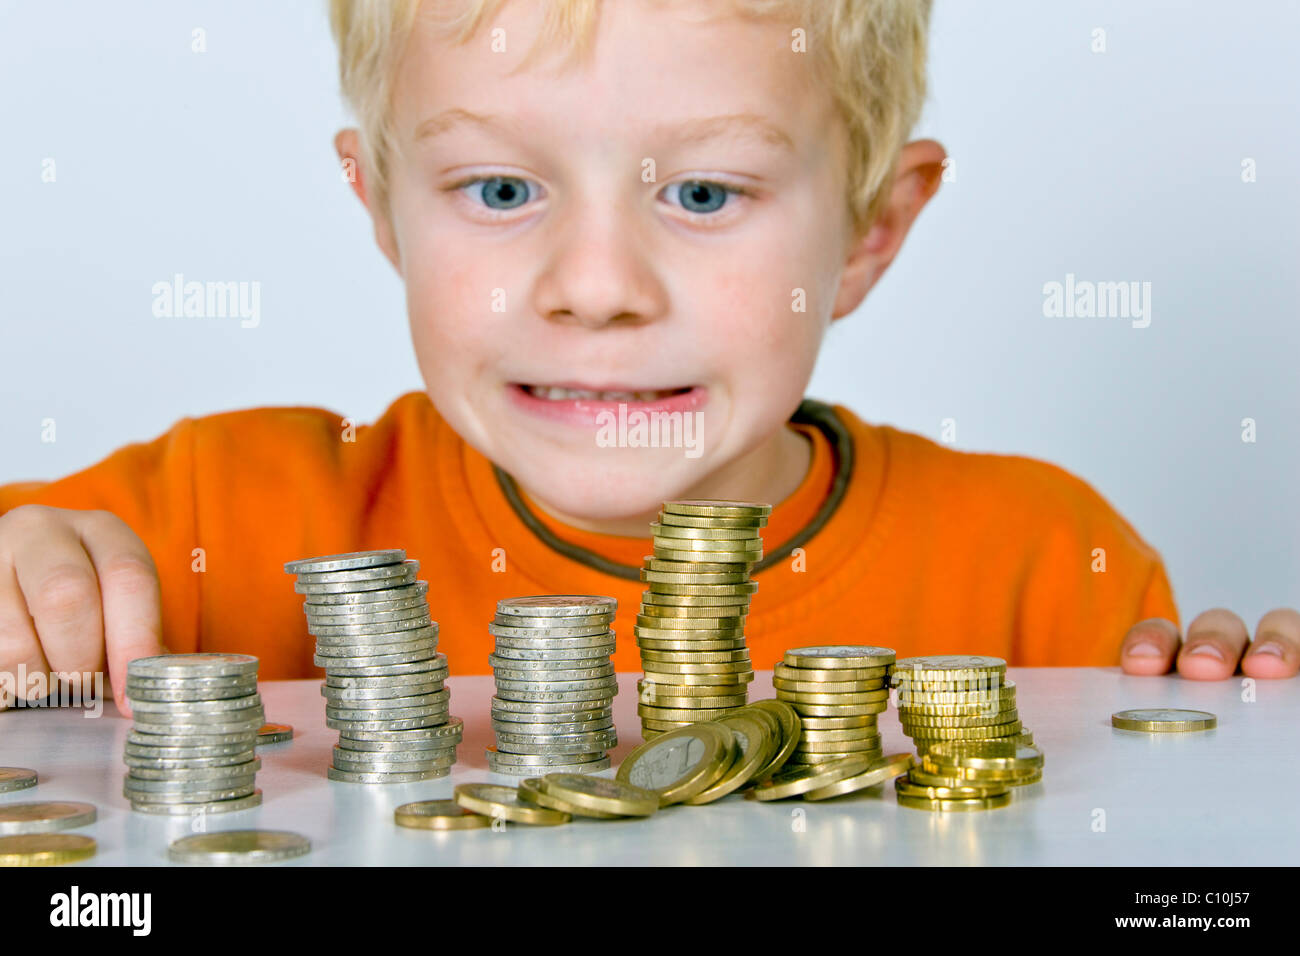 Boy, 5-years old, playing with euro coins, symbolic picture for price drop Stock Photo